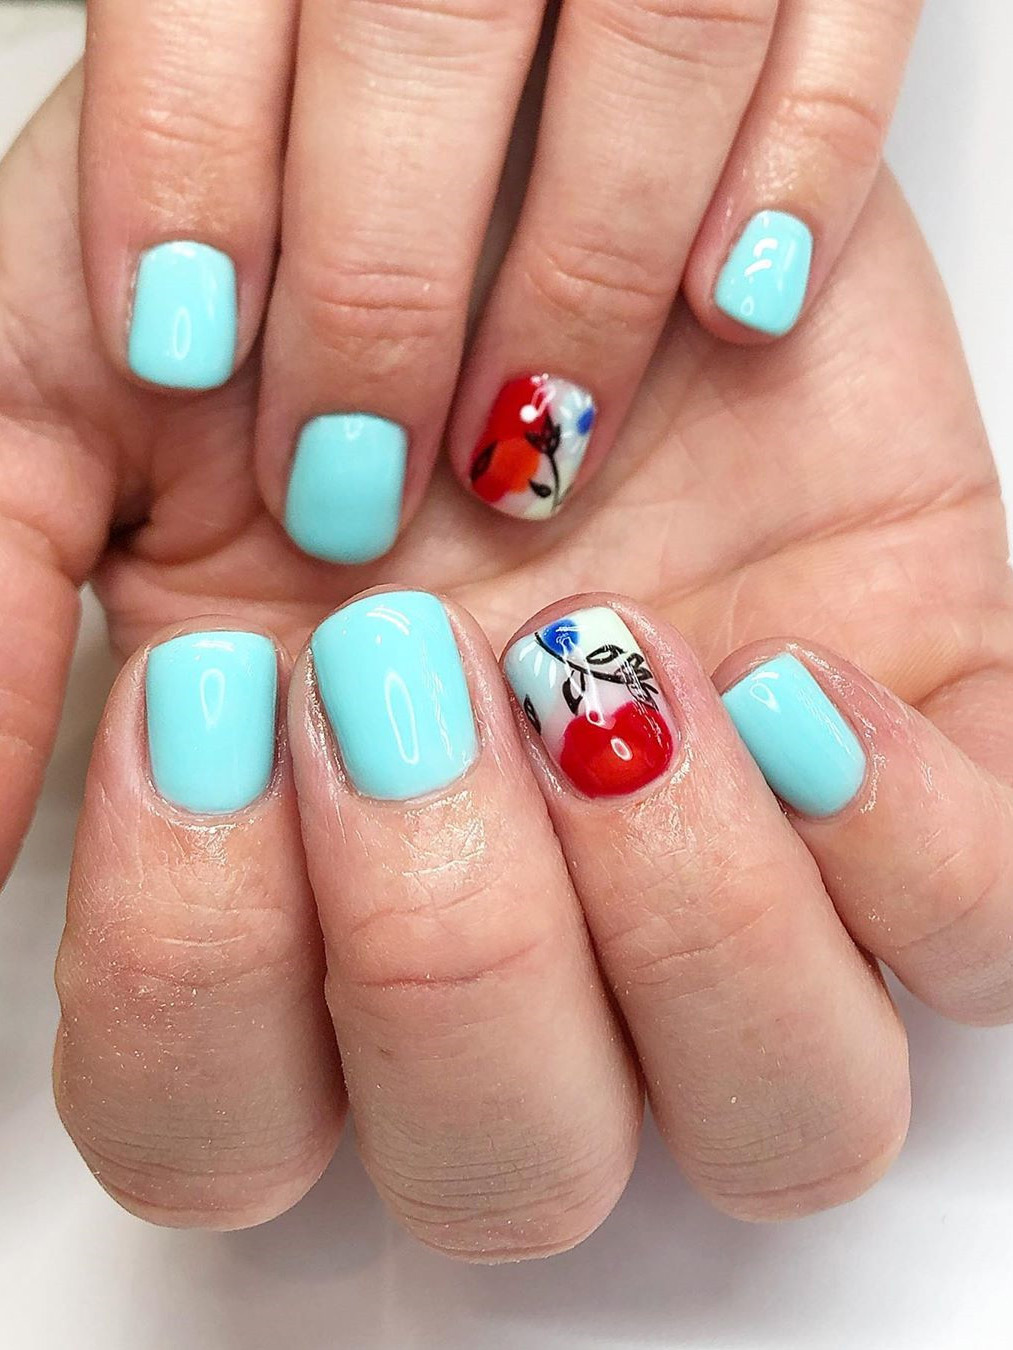 Summer nail ideas: we have put together 50 of the best summer nails. There is something for everyone from light and bright to bold to sparkling glitter. #summernailideas #summernails #nails2021trends